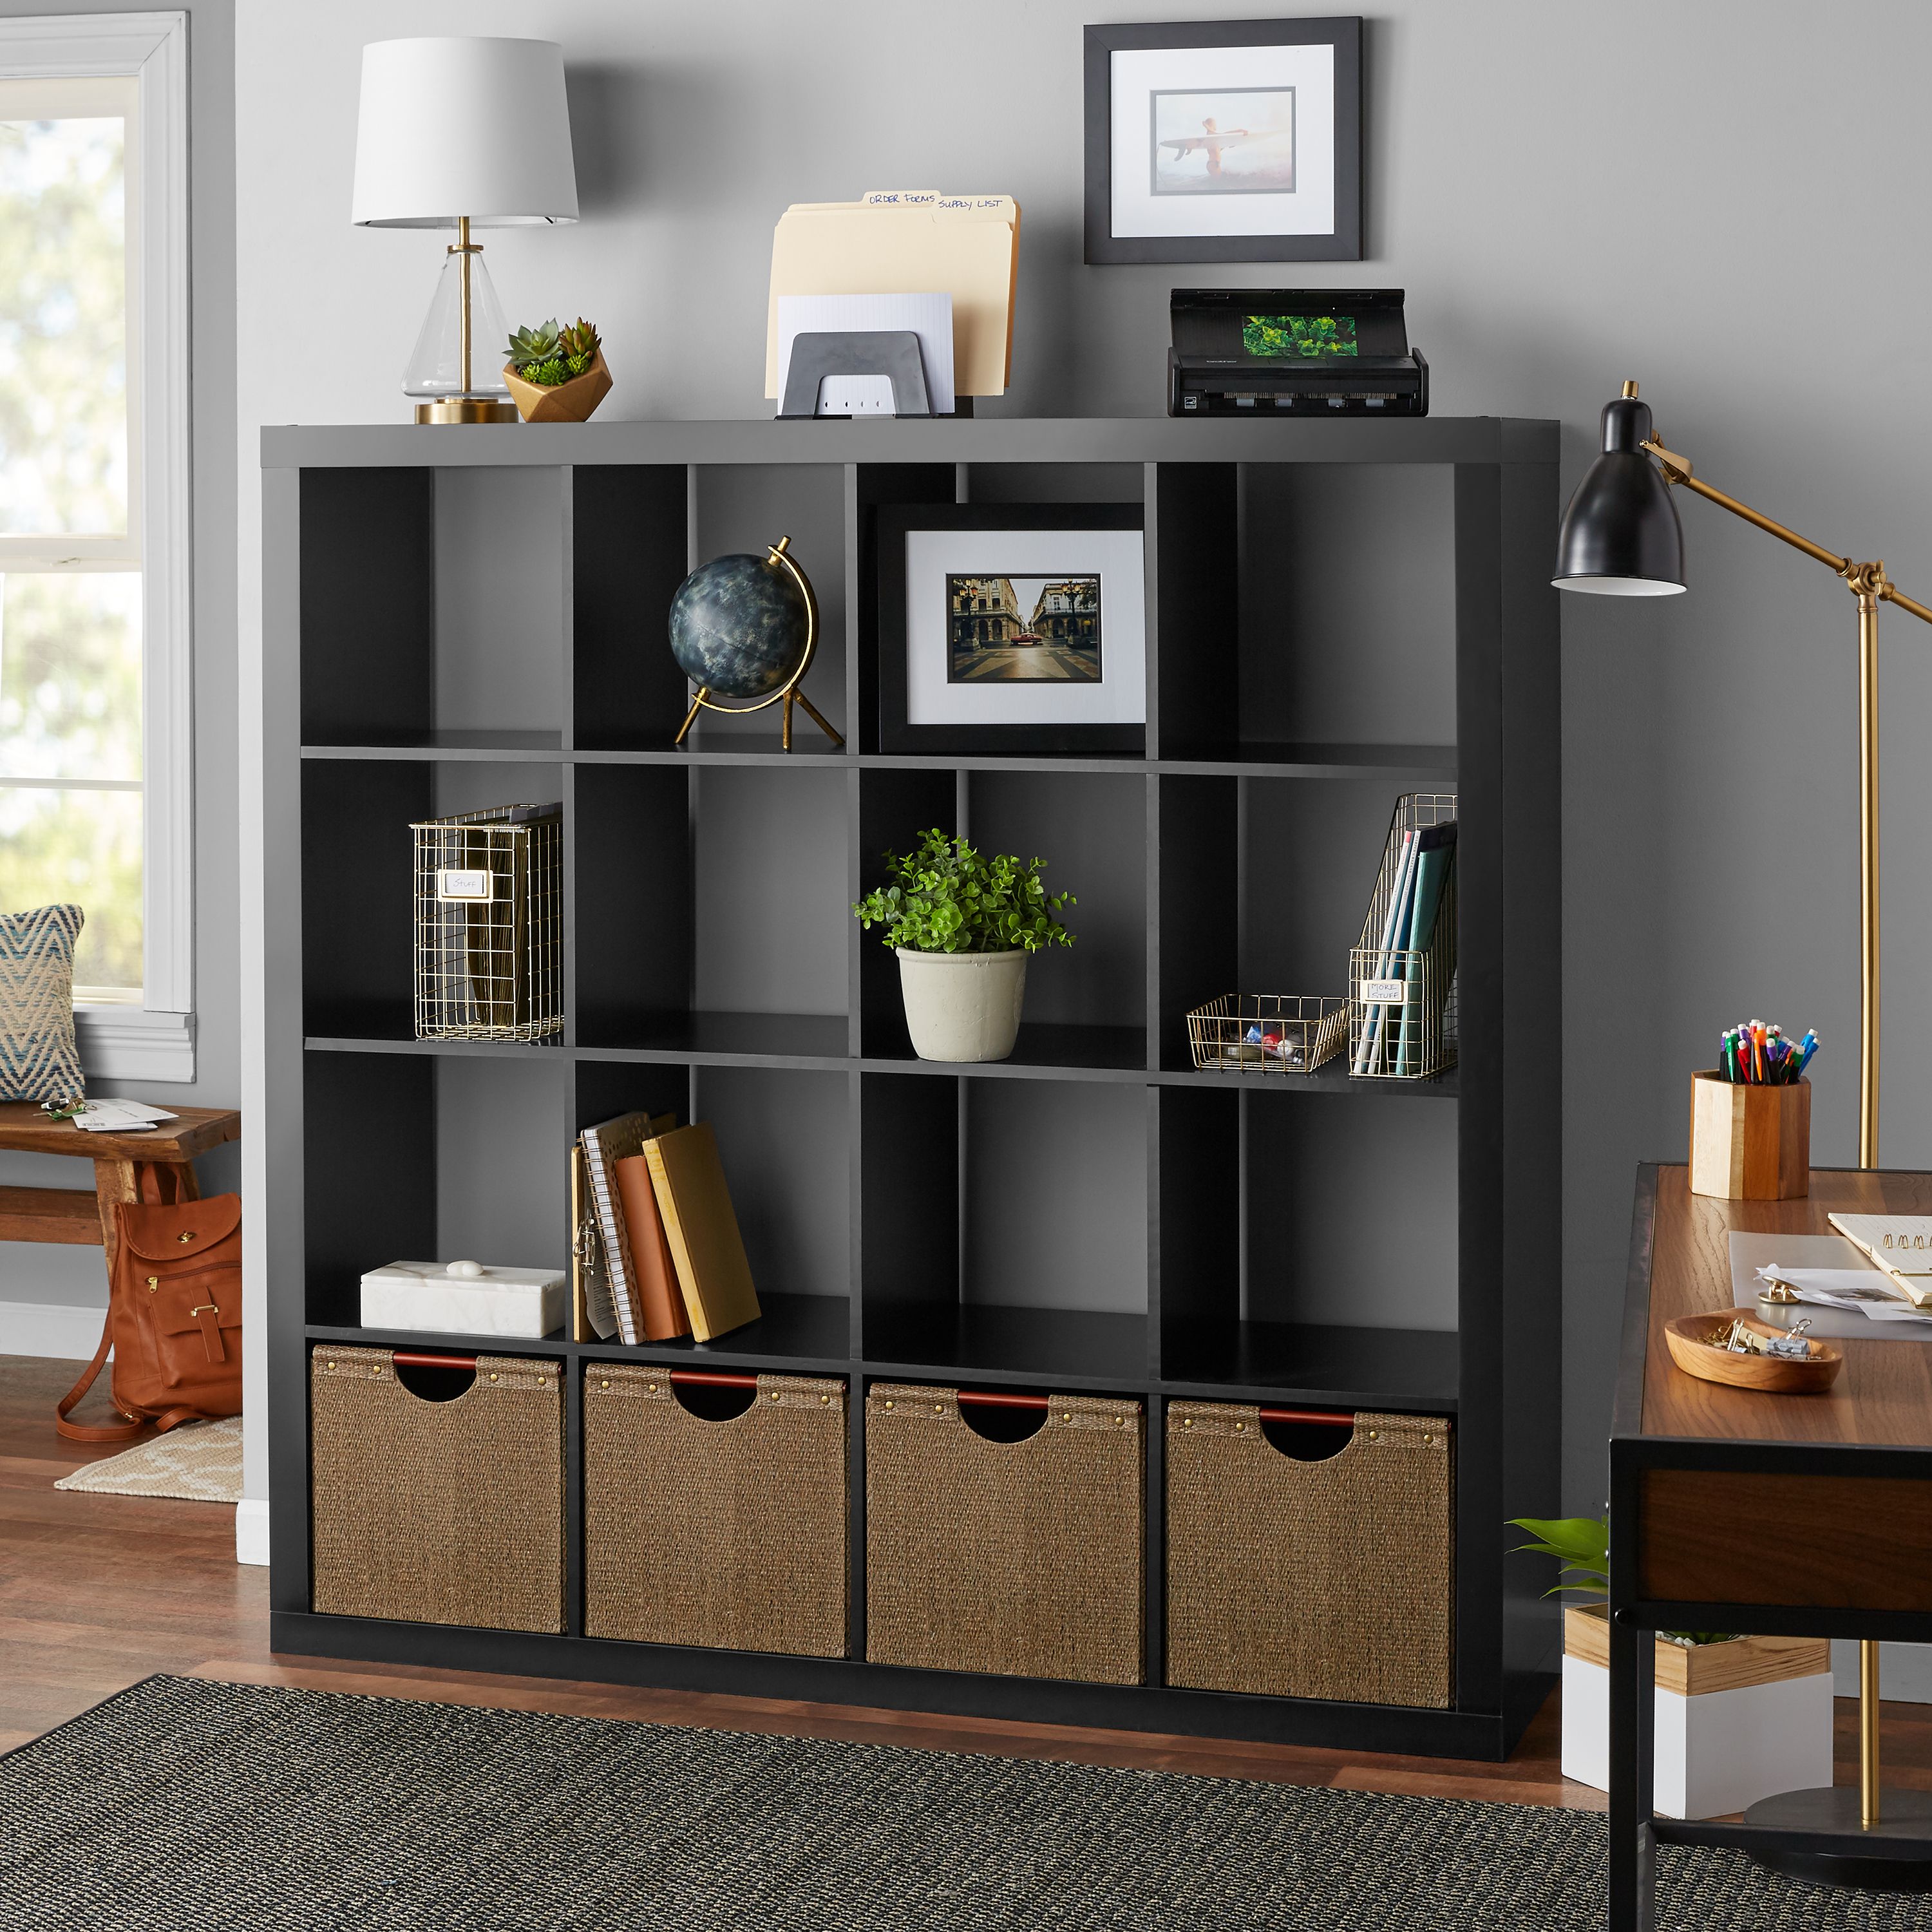 Better Homes & Gardens 16-Cube Storage Organizer, Solid Black - image 3 of 6